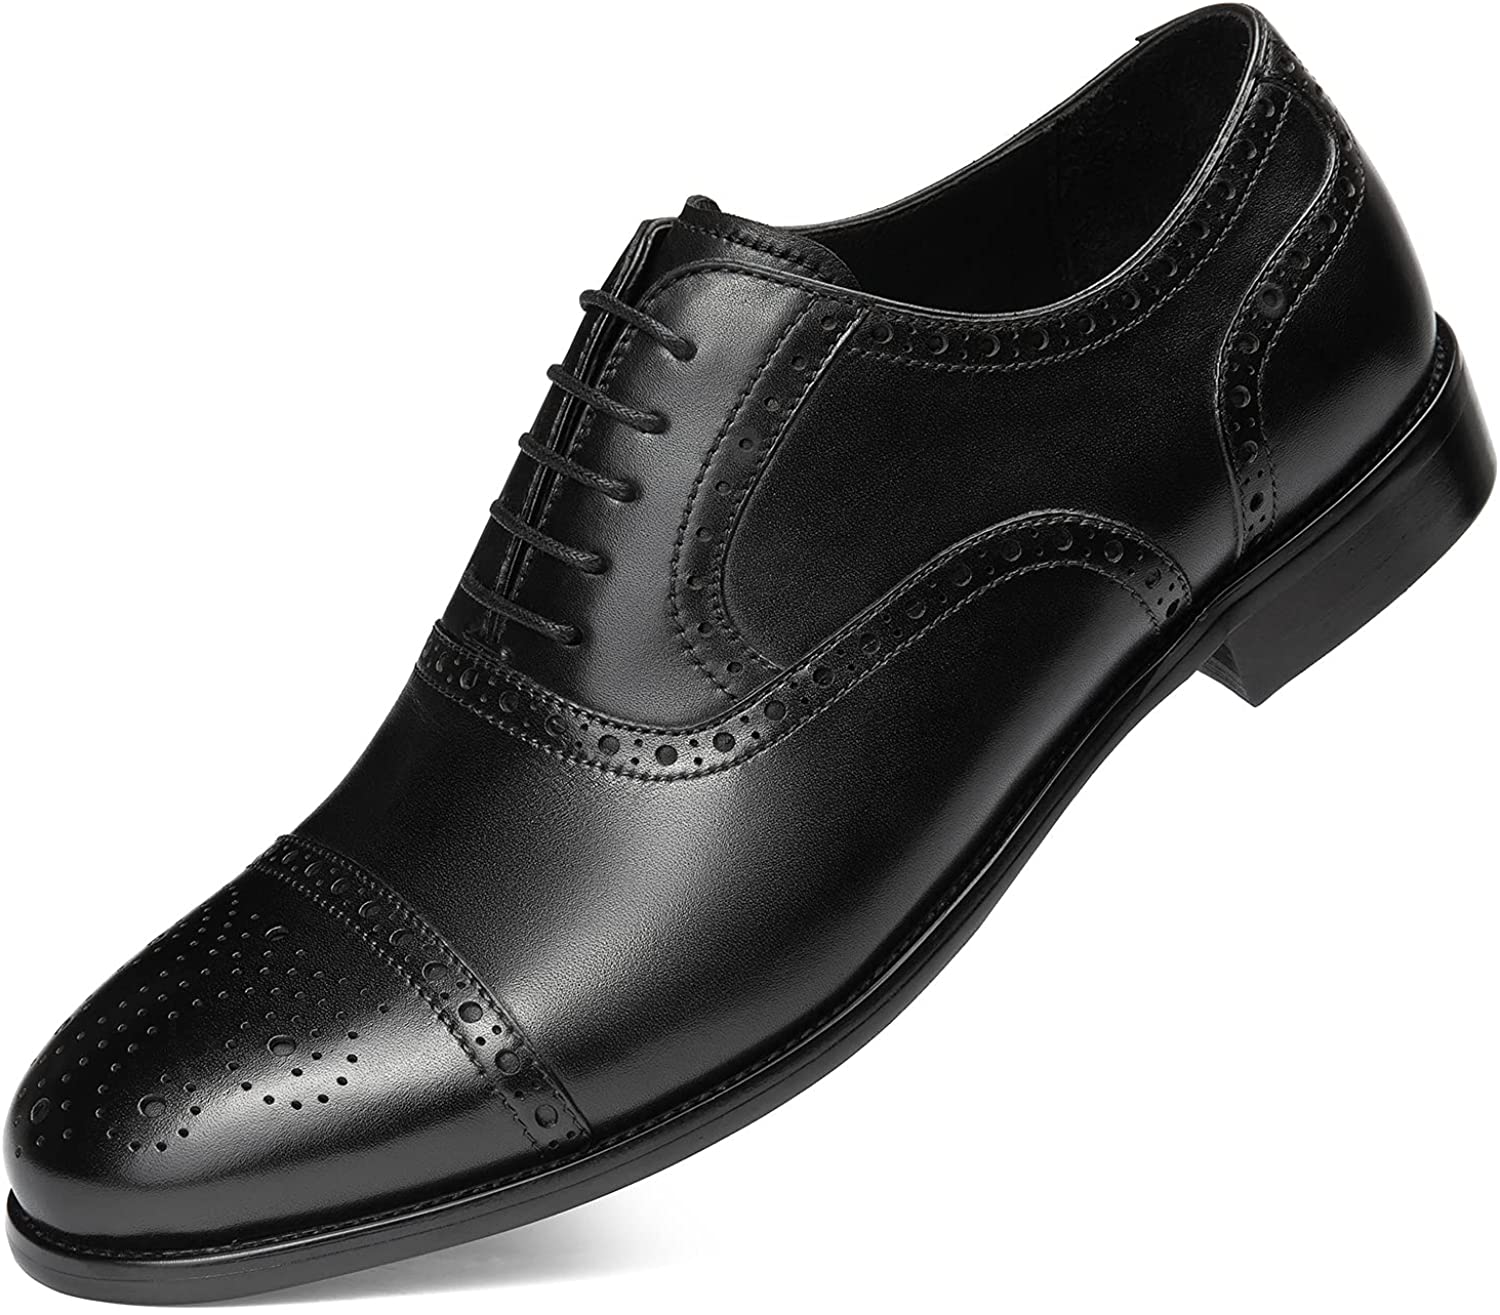 Charles Stone Wingtip Oxfords Full Brogue Men's Dress Leather Shoes Black